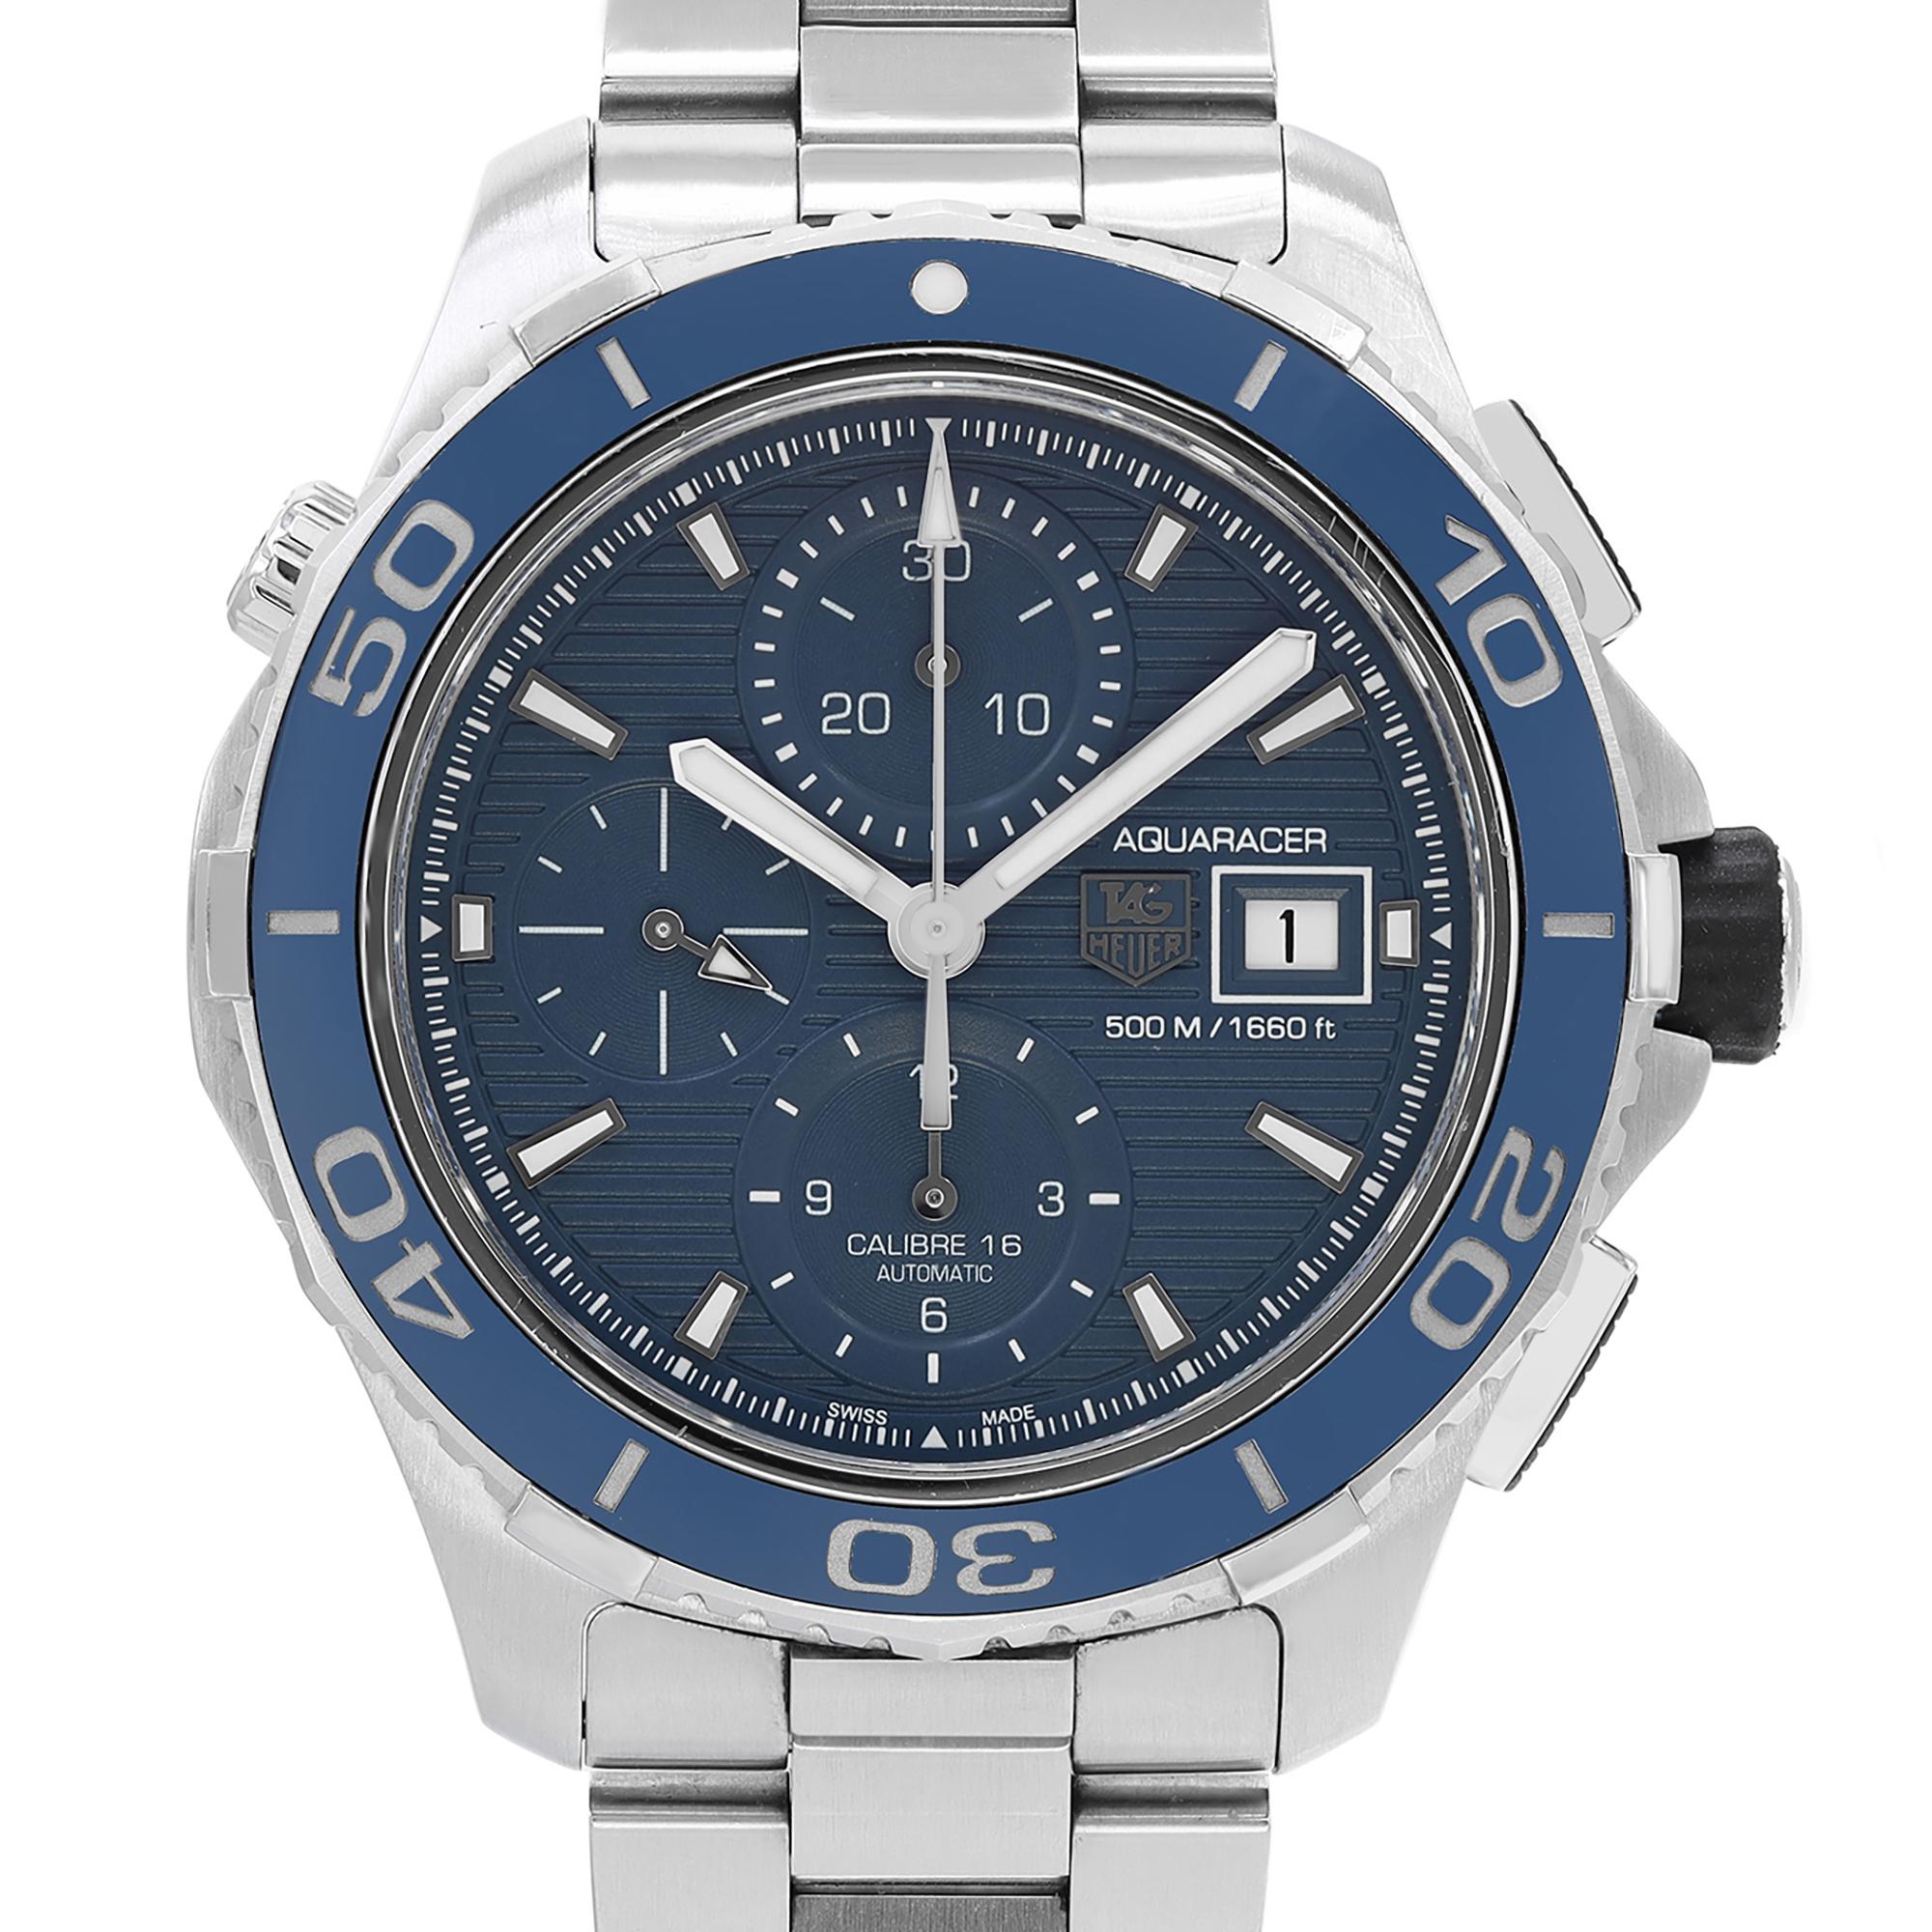 Pre-owned Tag Heuer Aquaracer Men's Watch CAK2112.BA0833. Little Scratch on the Bezel Insert. This Timepiece is Powered by an Automatic Movement And Features: Stainless Steel Case and bracelets. Unidirectional Rotating Blue Bezel, Blue Dial with